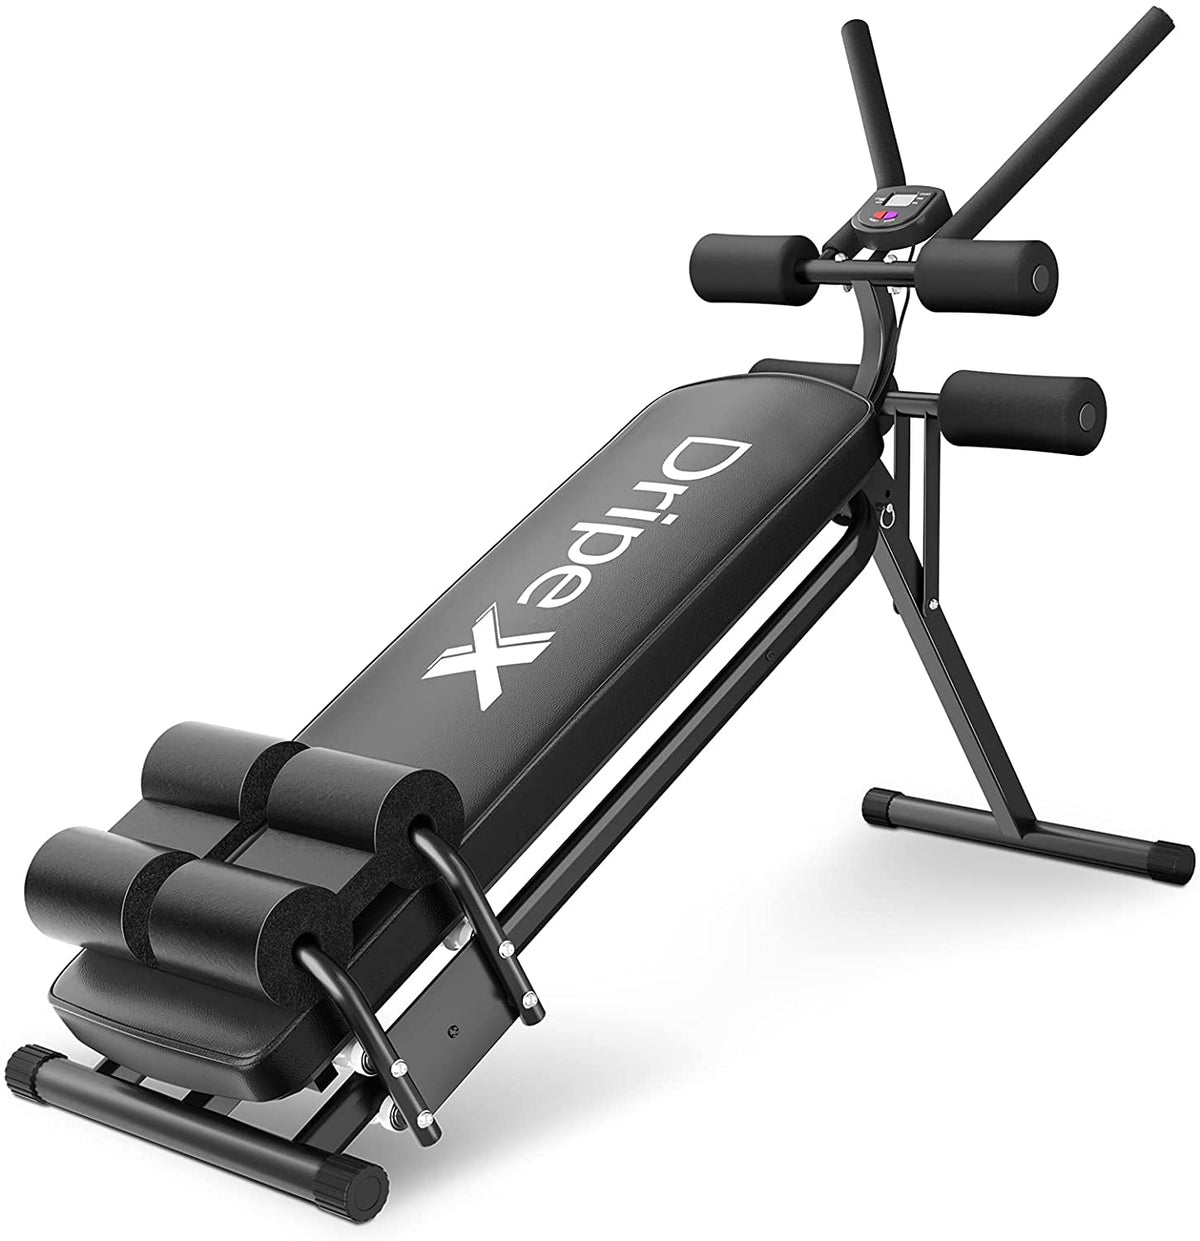 Adjustable Sit Up Bench for Ab Workout